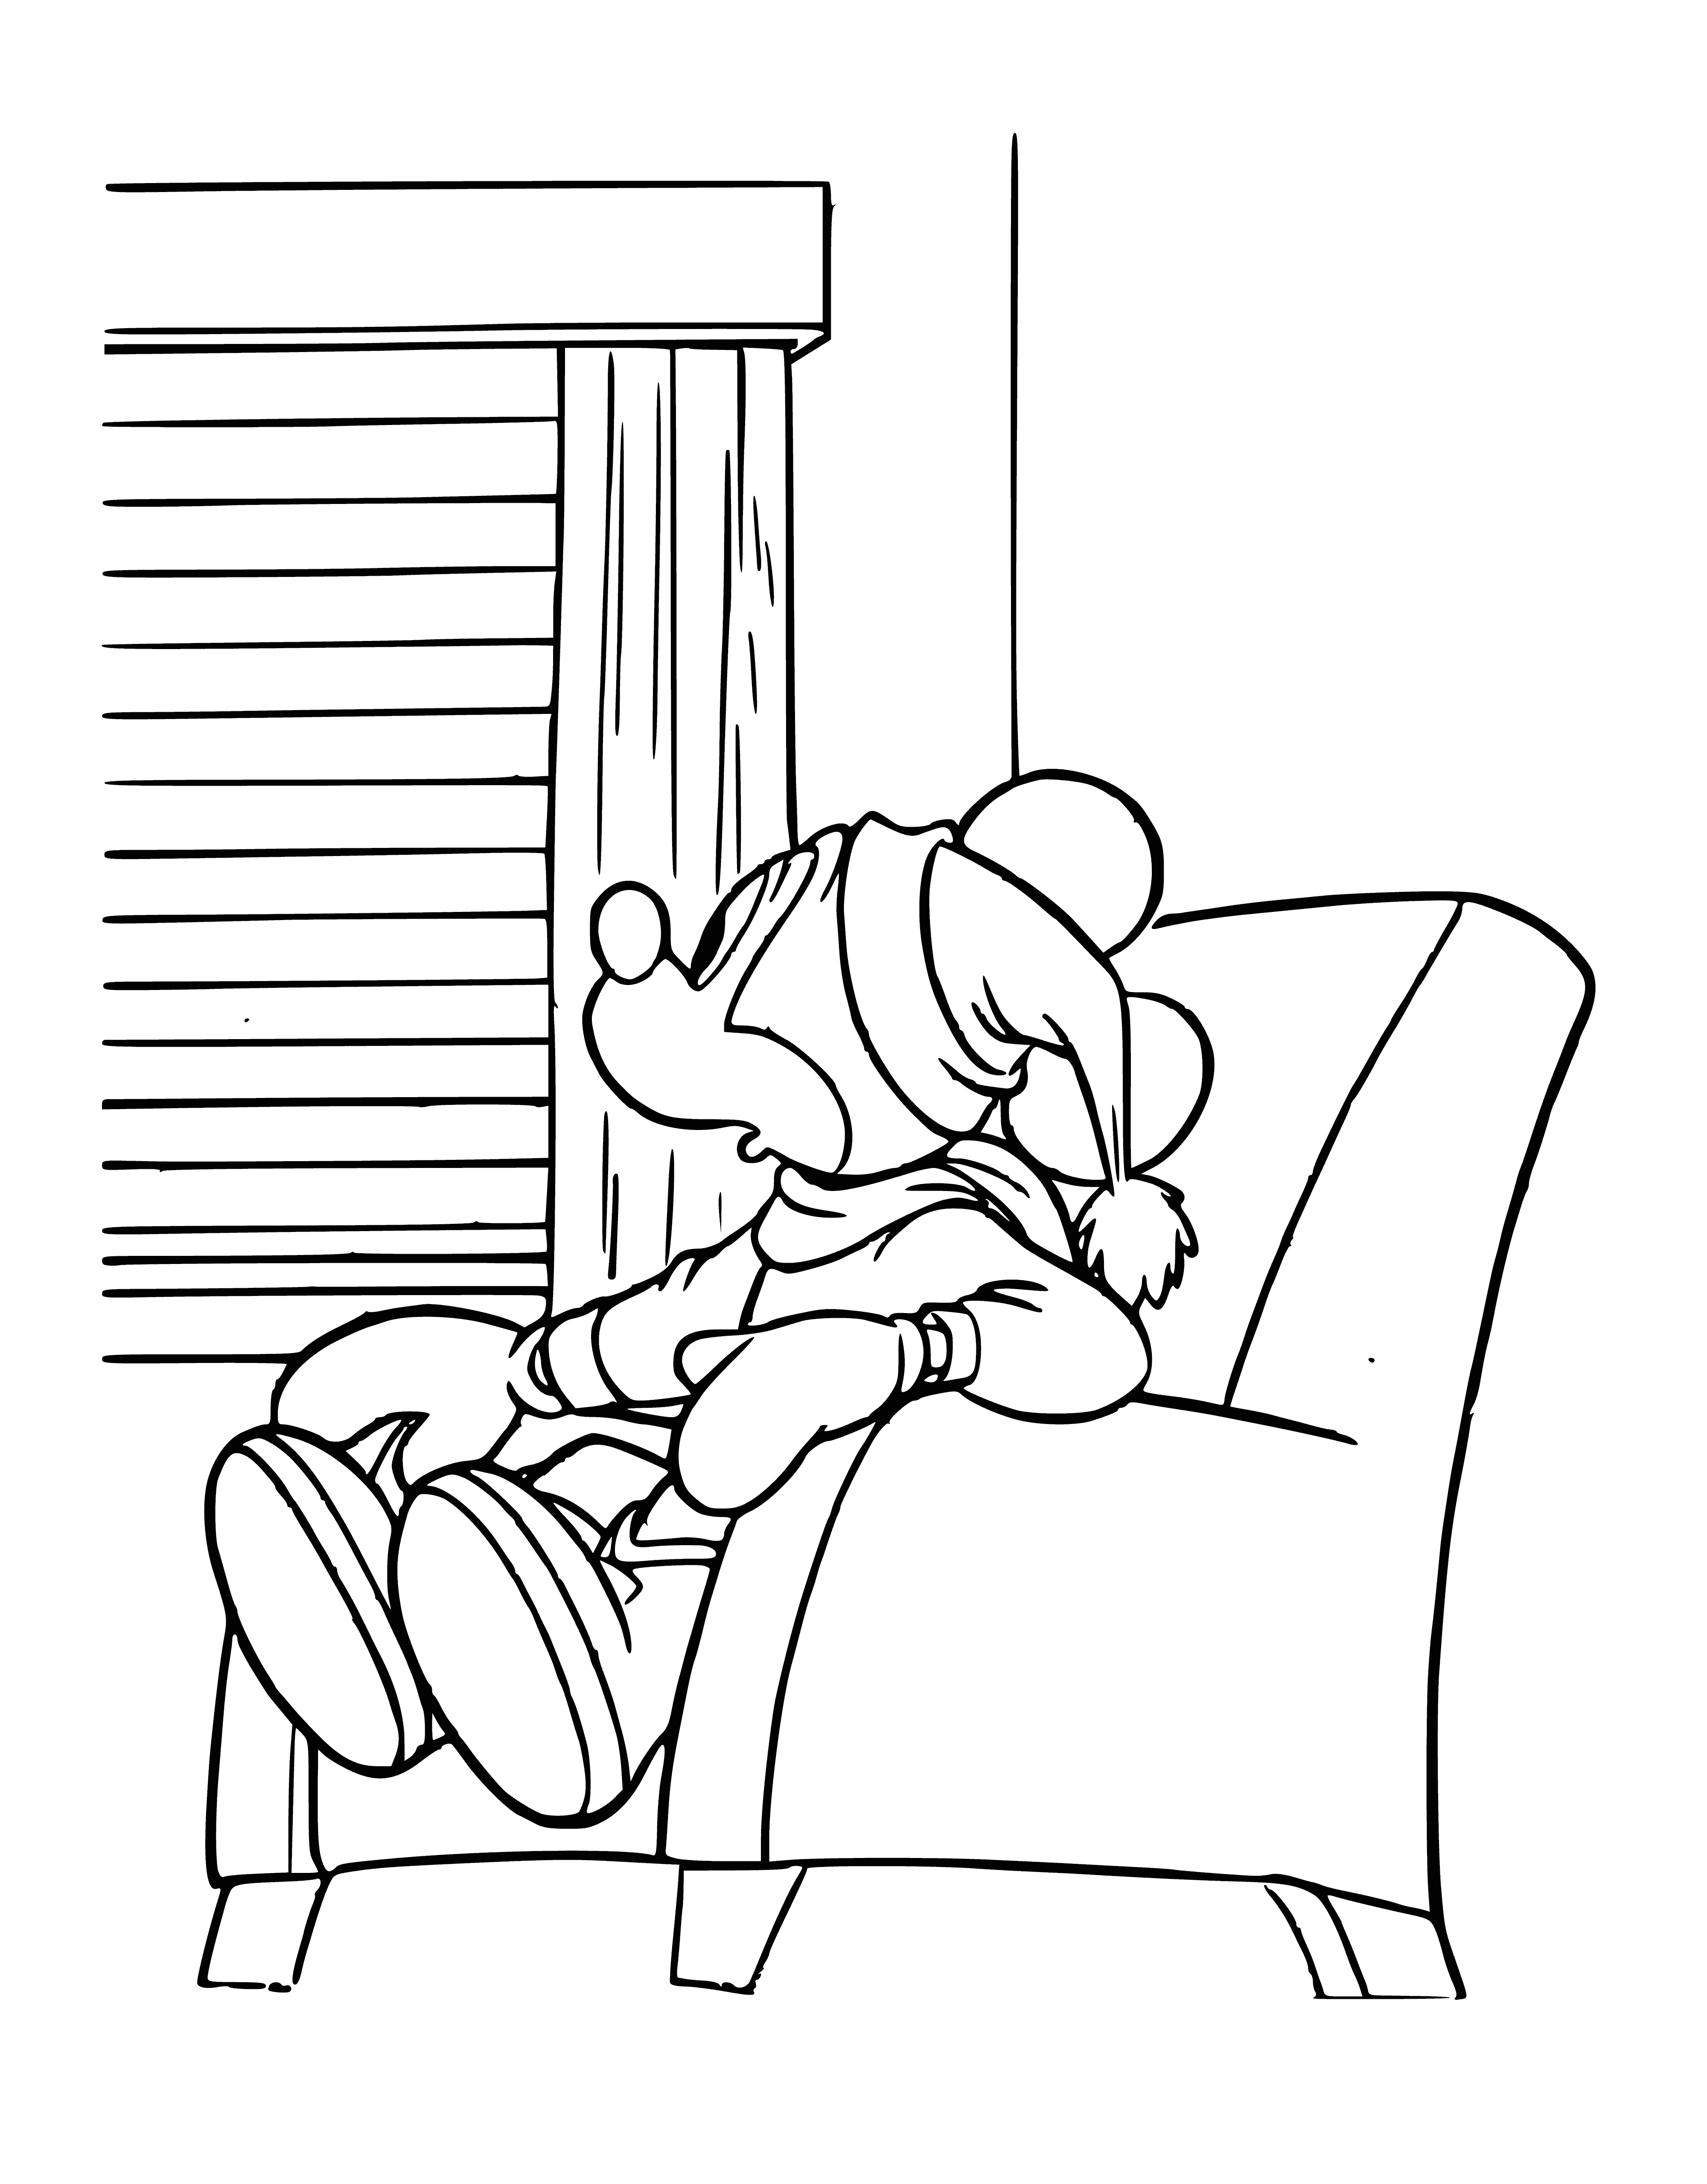 In the armchair coloring page